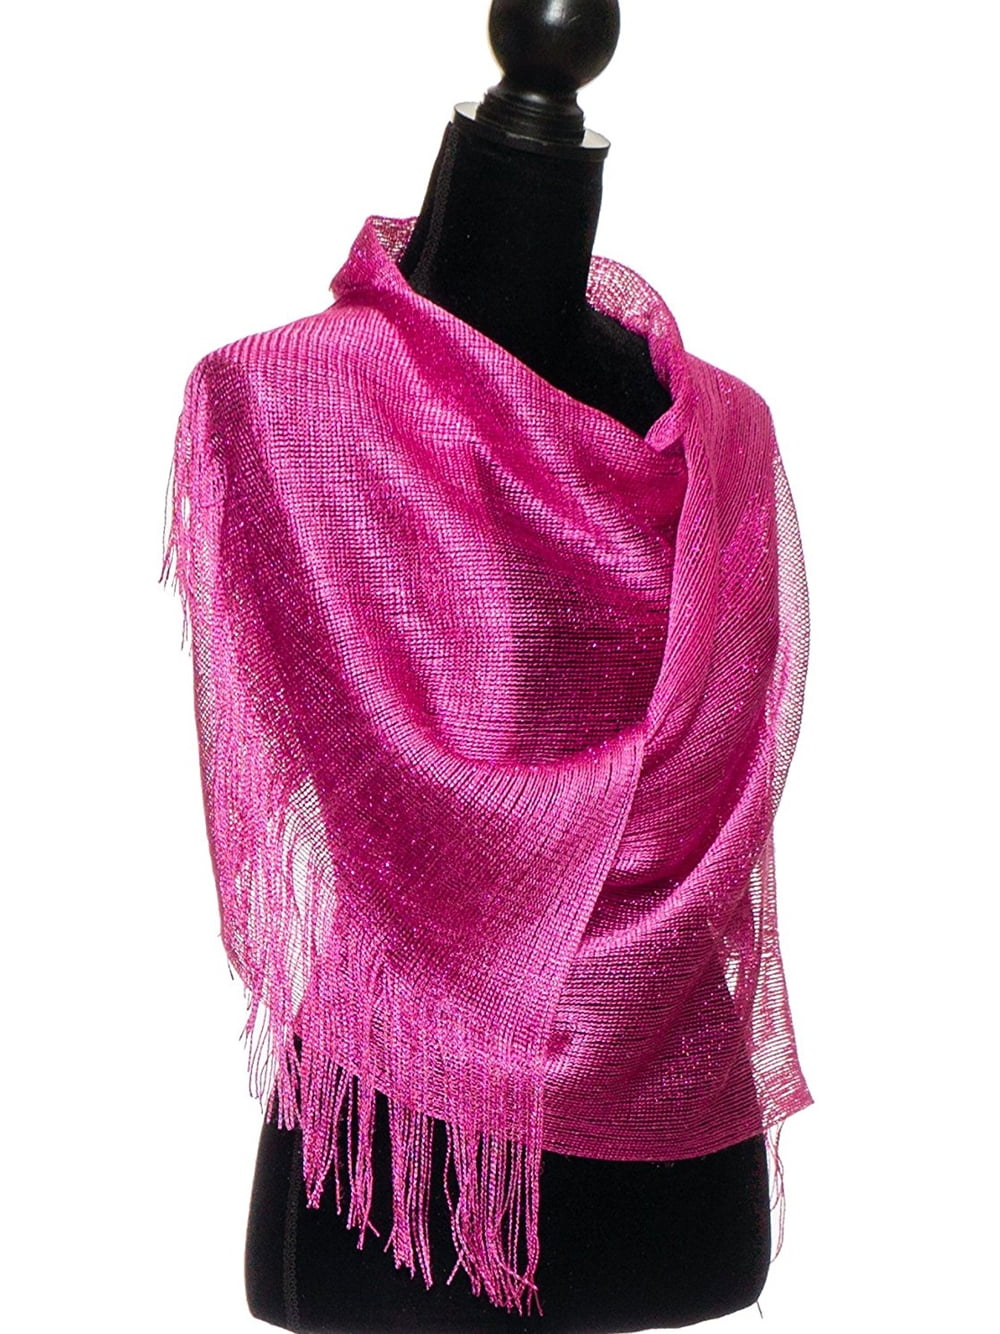 LIGHT WEIGHT SCARF WRAP EVENING WEAR ALL SEASON SOLID COLOR HOTPINK 